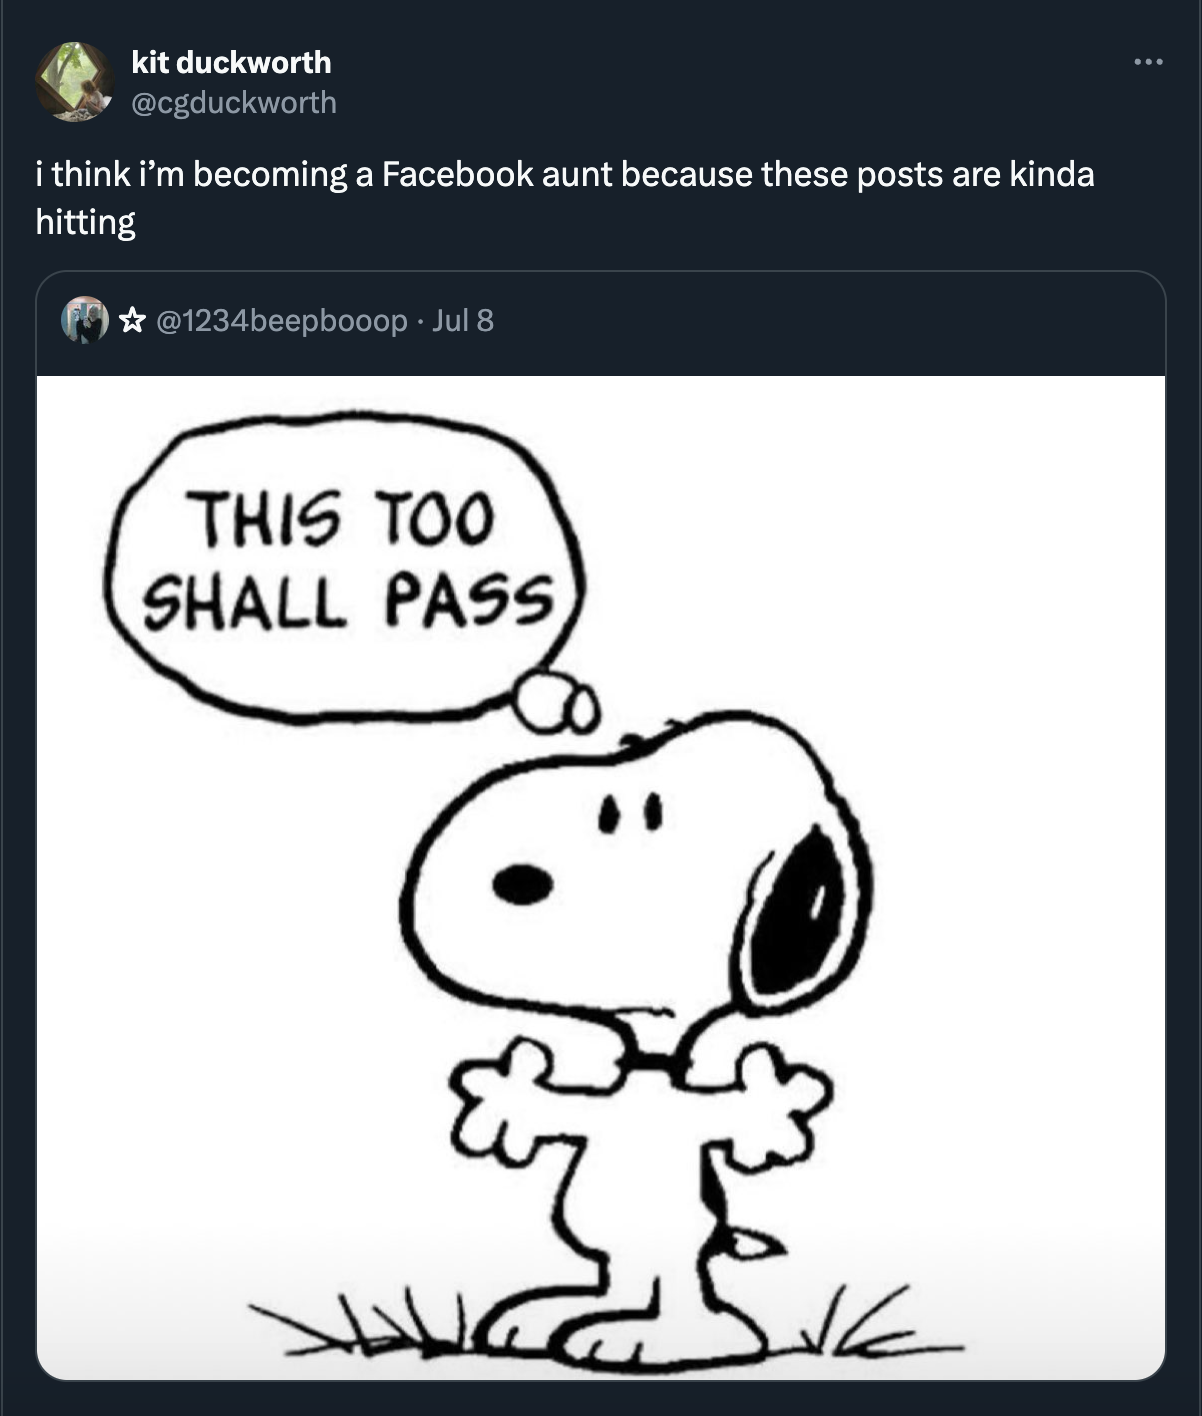 snoopy this too shall pass - kit duckworth i think i'm becoming a Facebook aunt because these posts are kinda hitting Jul 8 This Too Shall Pass